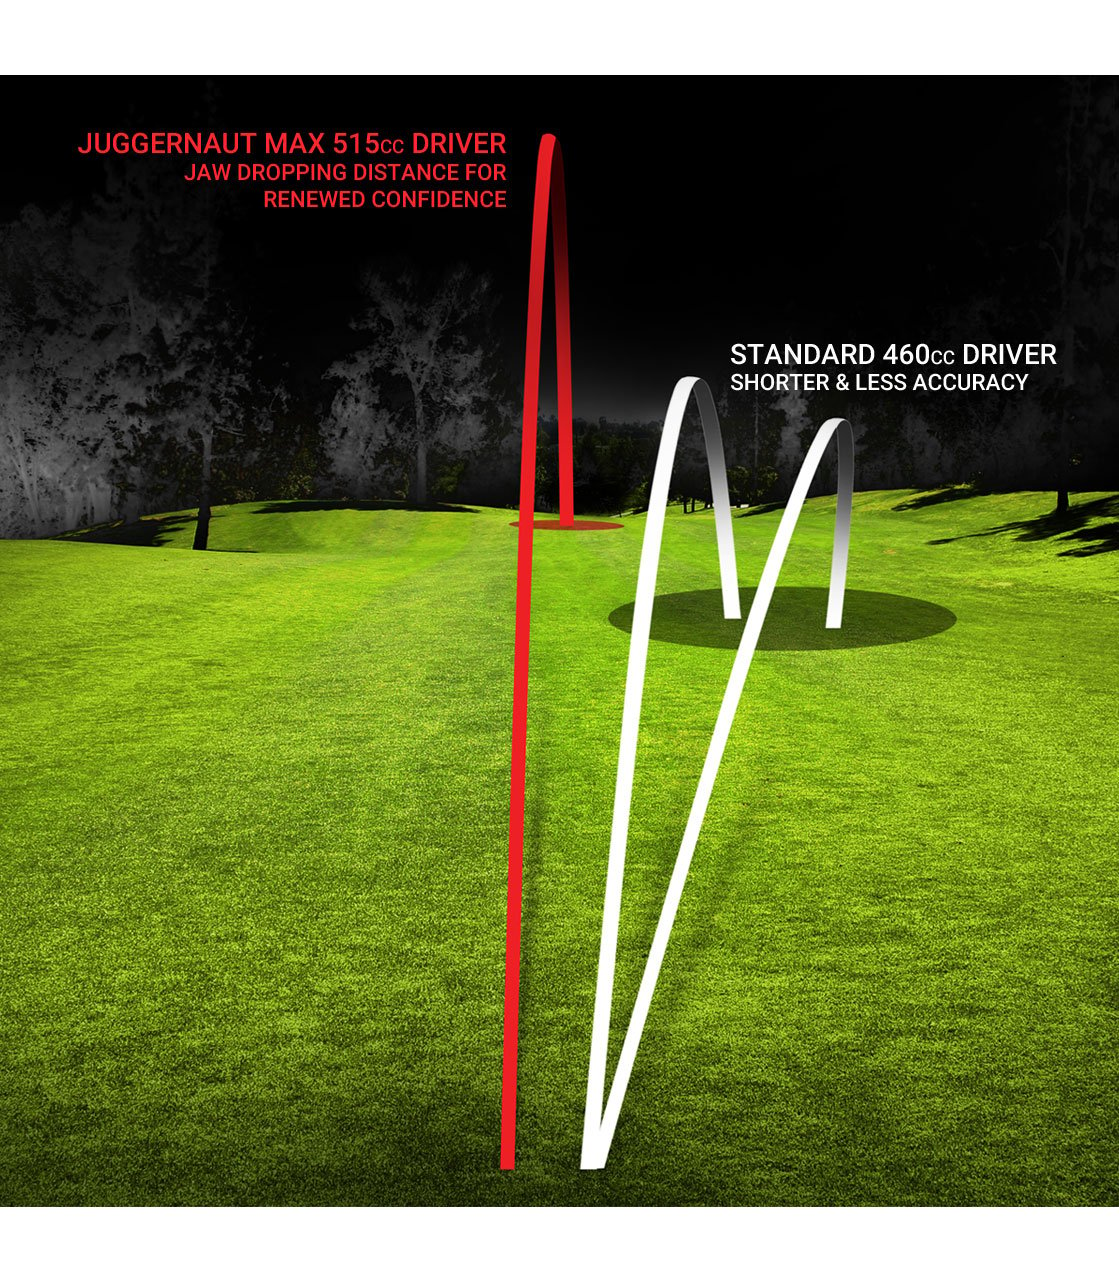 accuracy and distance comparison between normal driver versus Juggernaut Max driver